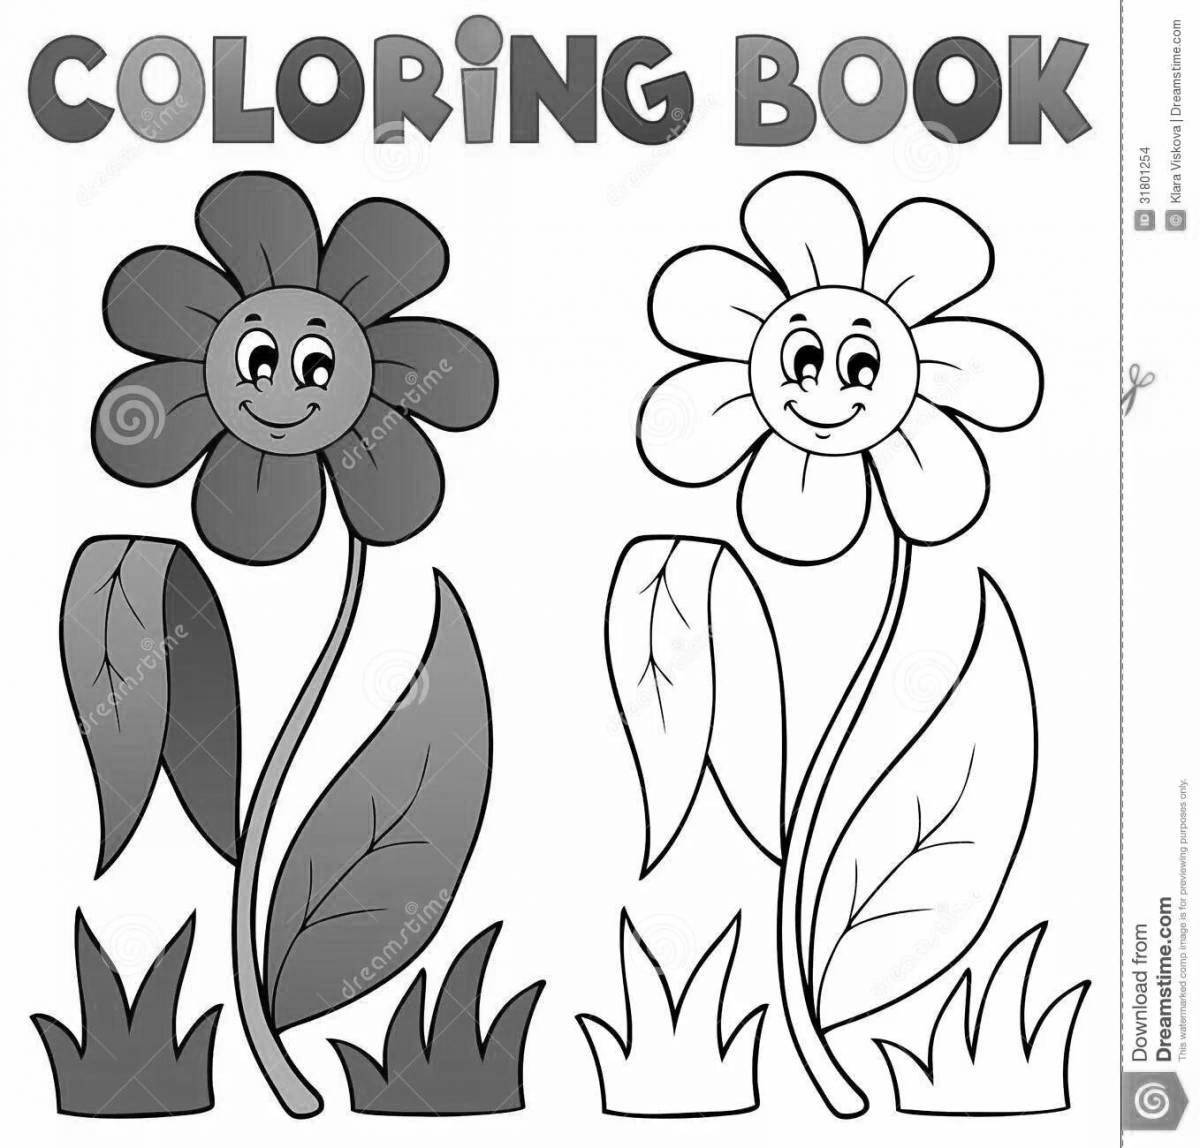 Shining coloring book with clues